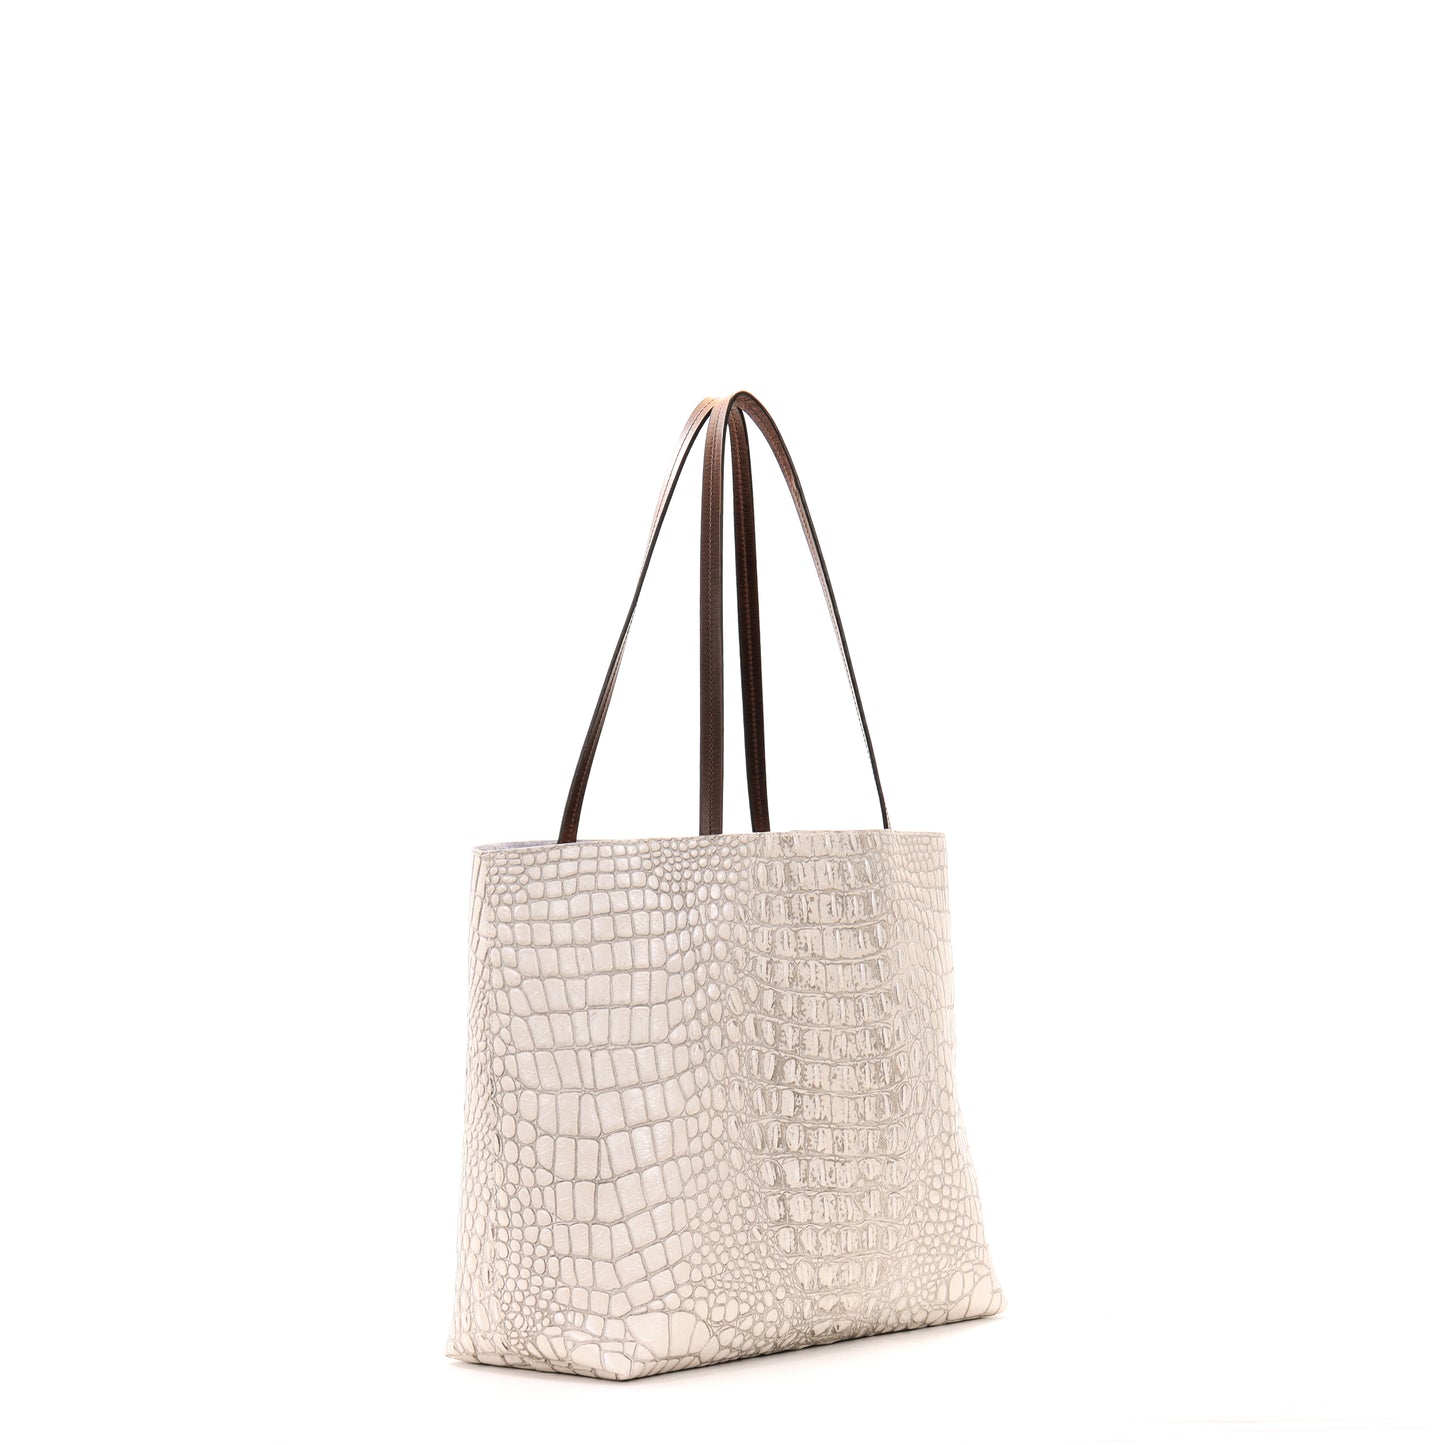 ESSENTIAL TOTE OYSTER EMBOSSED CROC